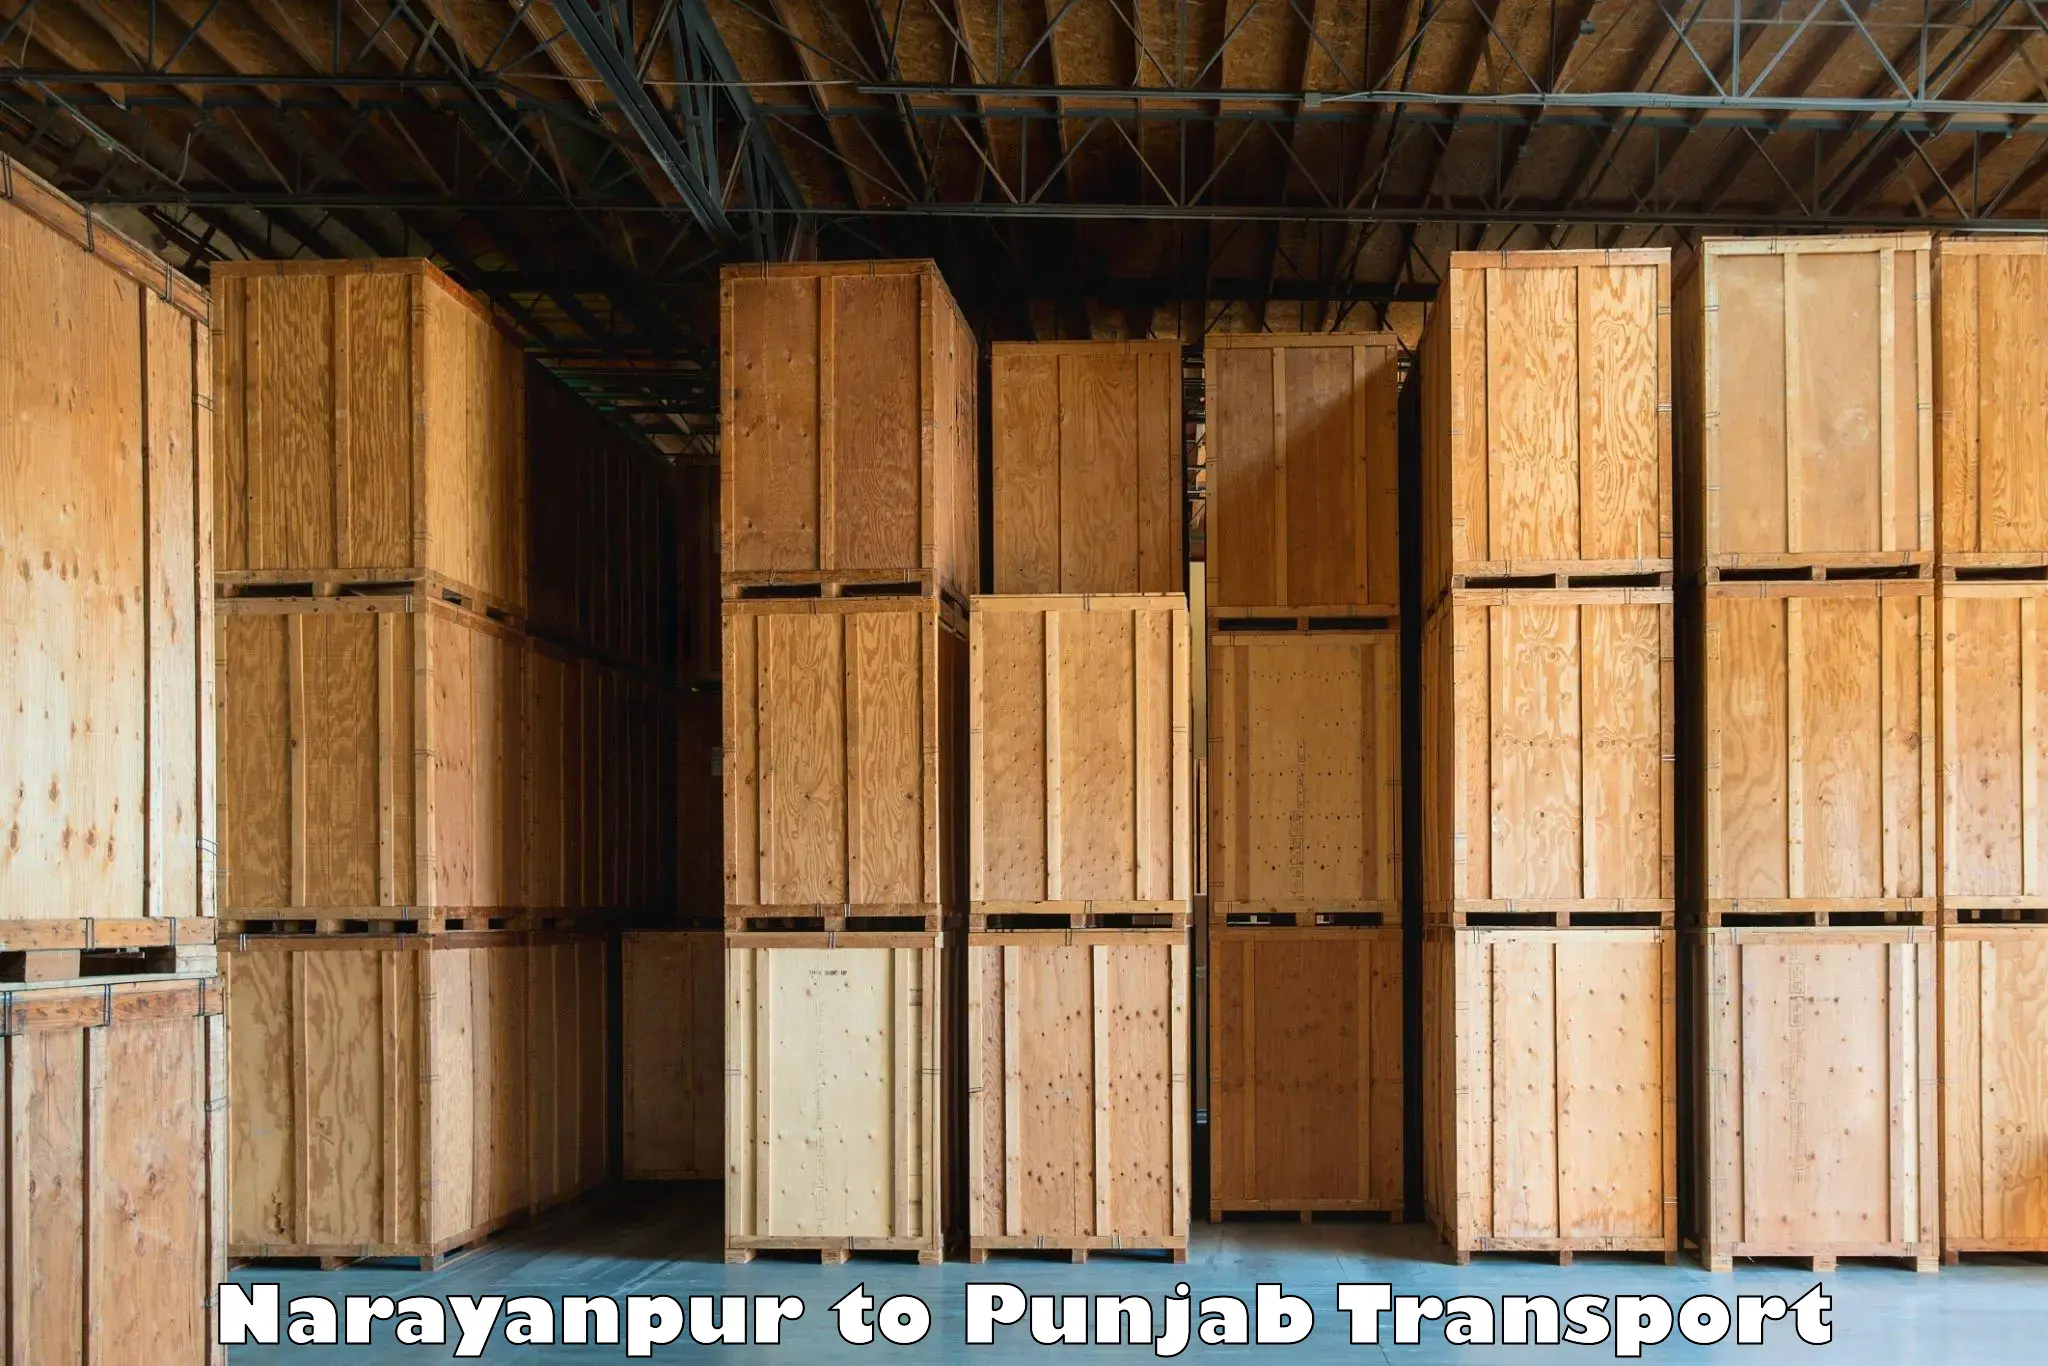 Commercial transport service Narayanpur to Anandpur Sahib